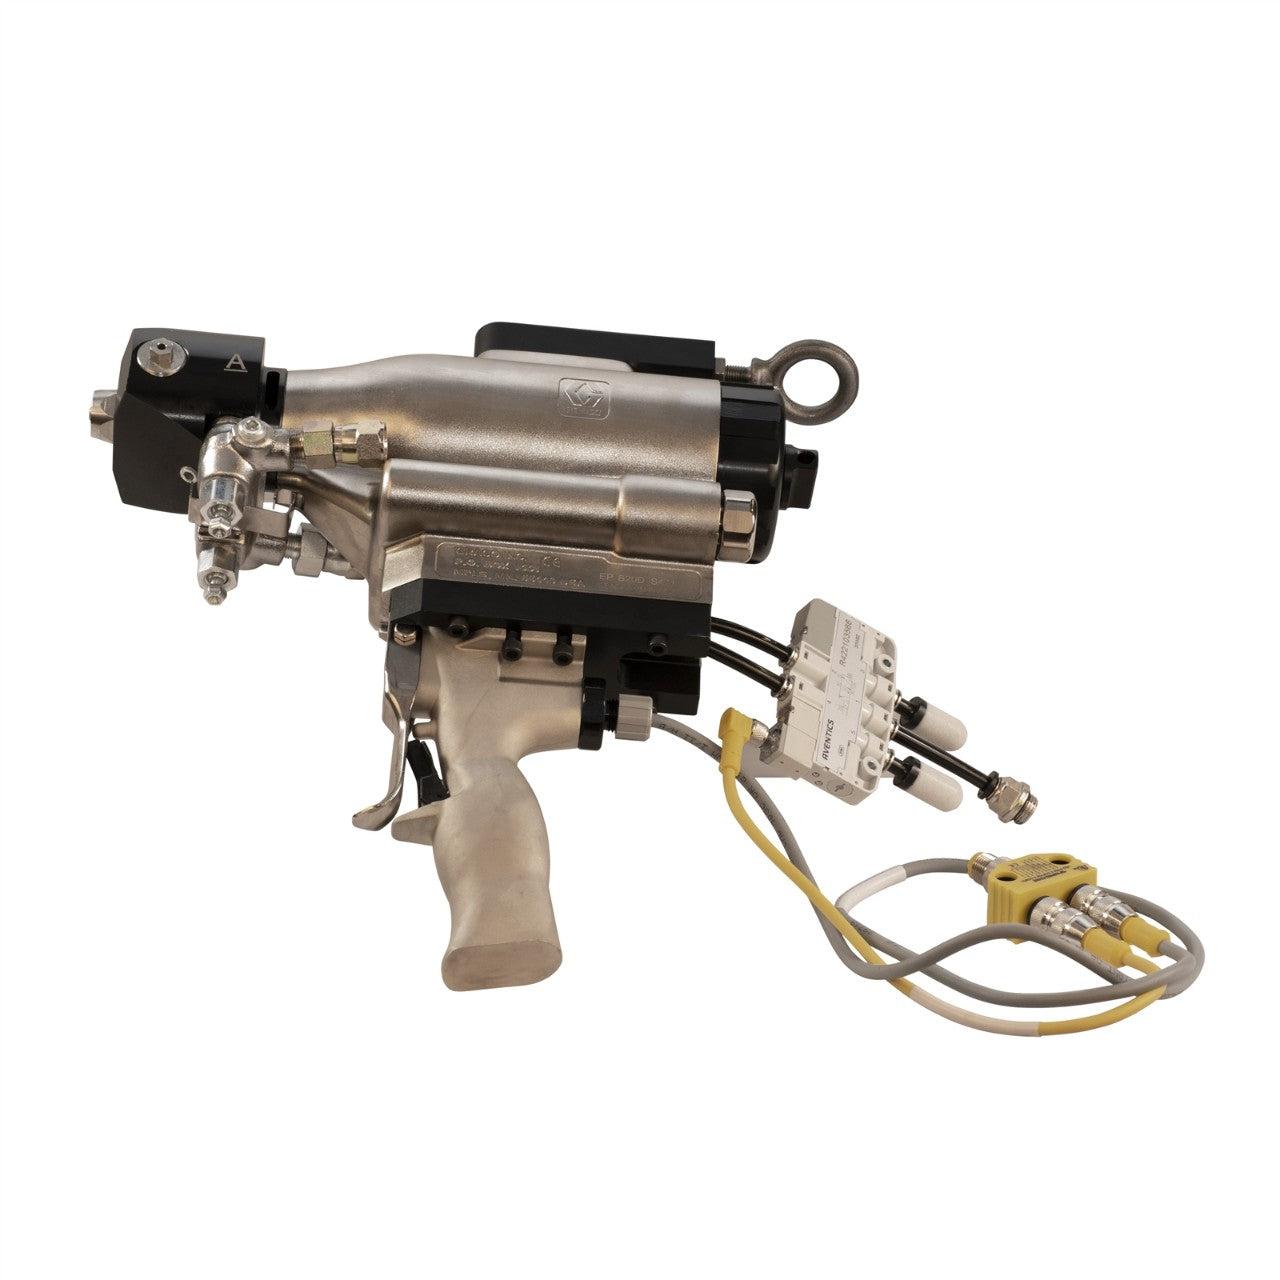 EP250 Handheld Pour Gun with 0.25 in Purge Rod Diameter and 0.031 Orifice Size